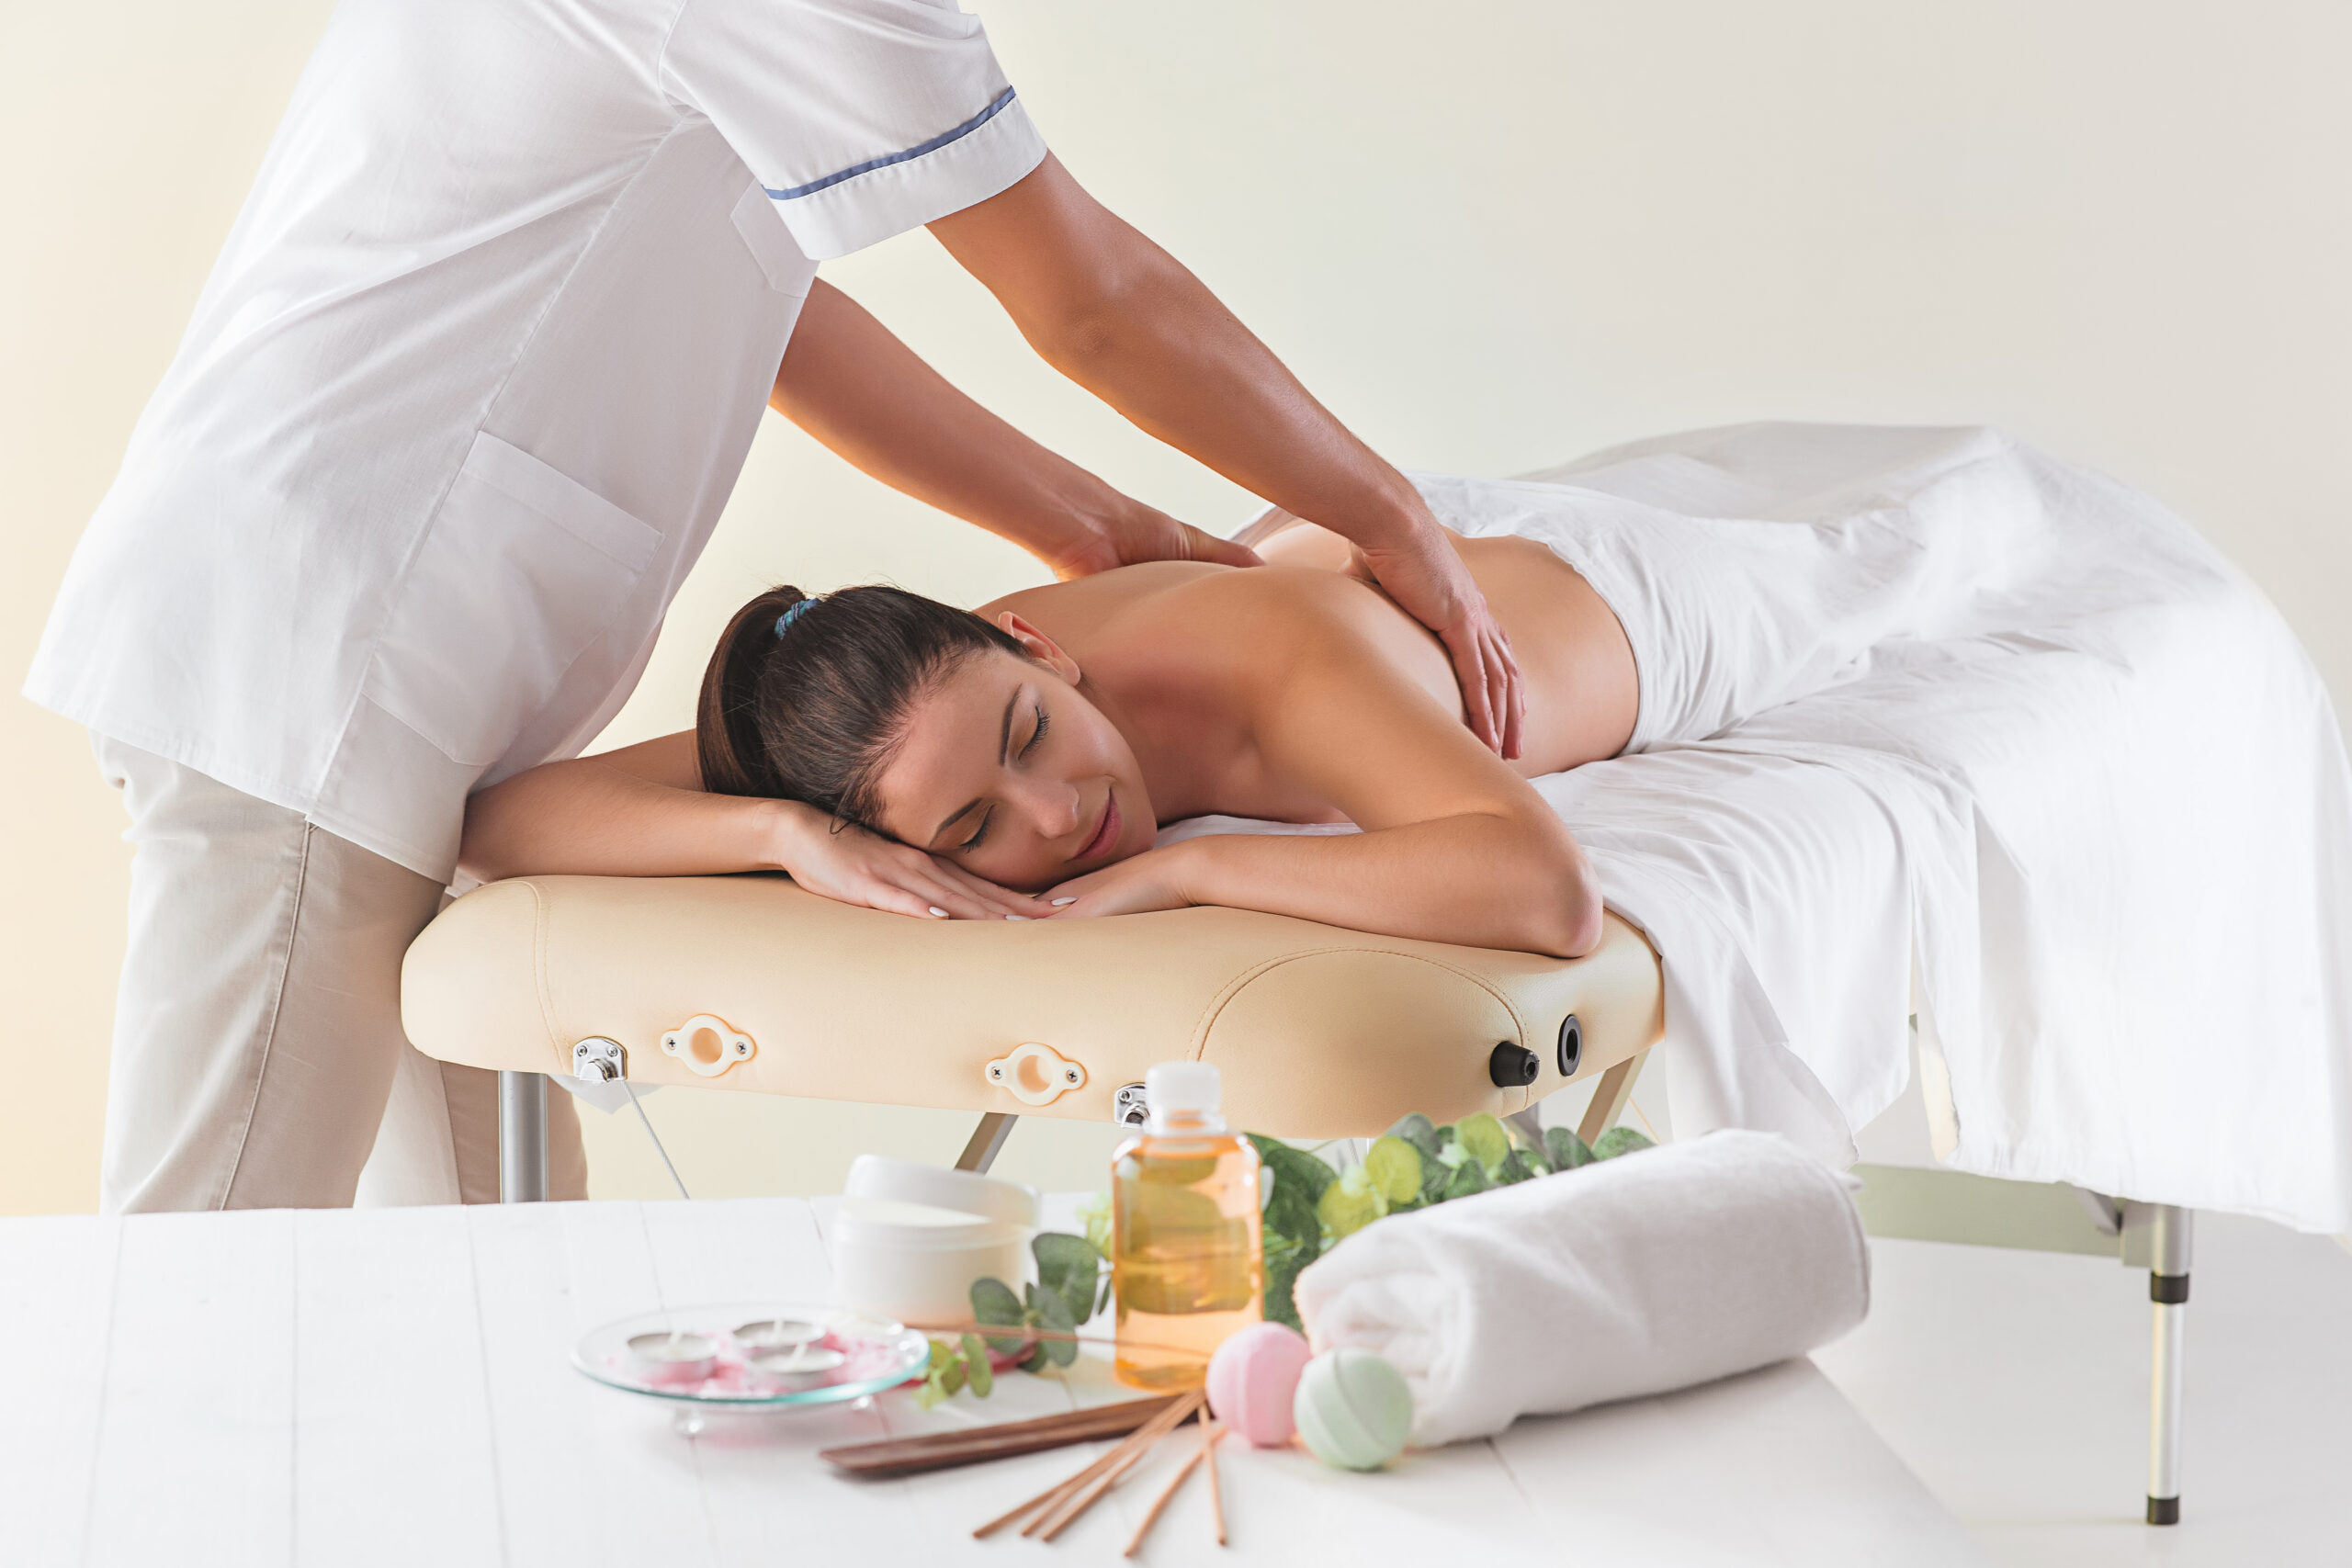 Looking for Best Massage Parlour: Let’s check Reviews, Benefits, Pros and Cons